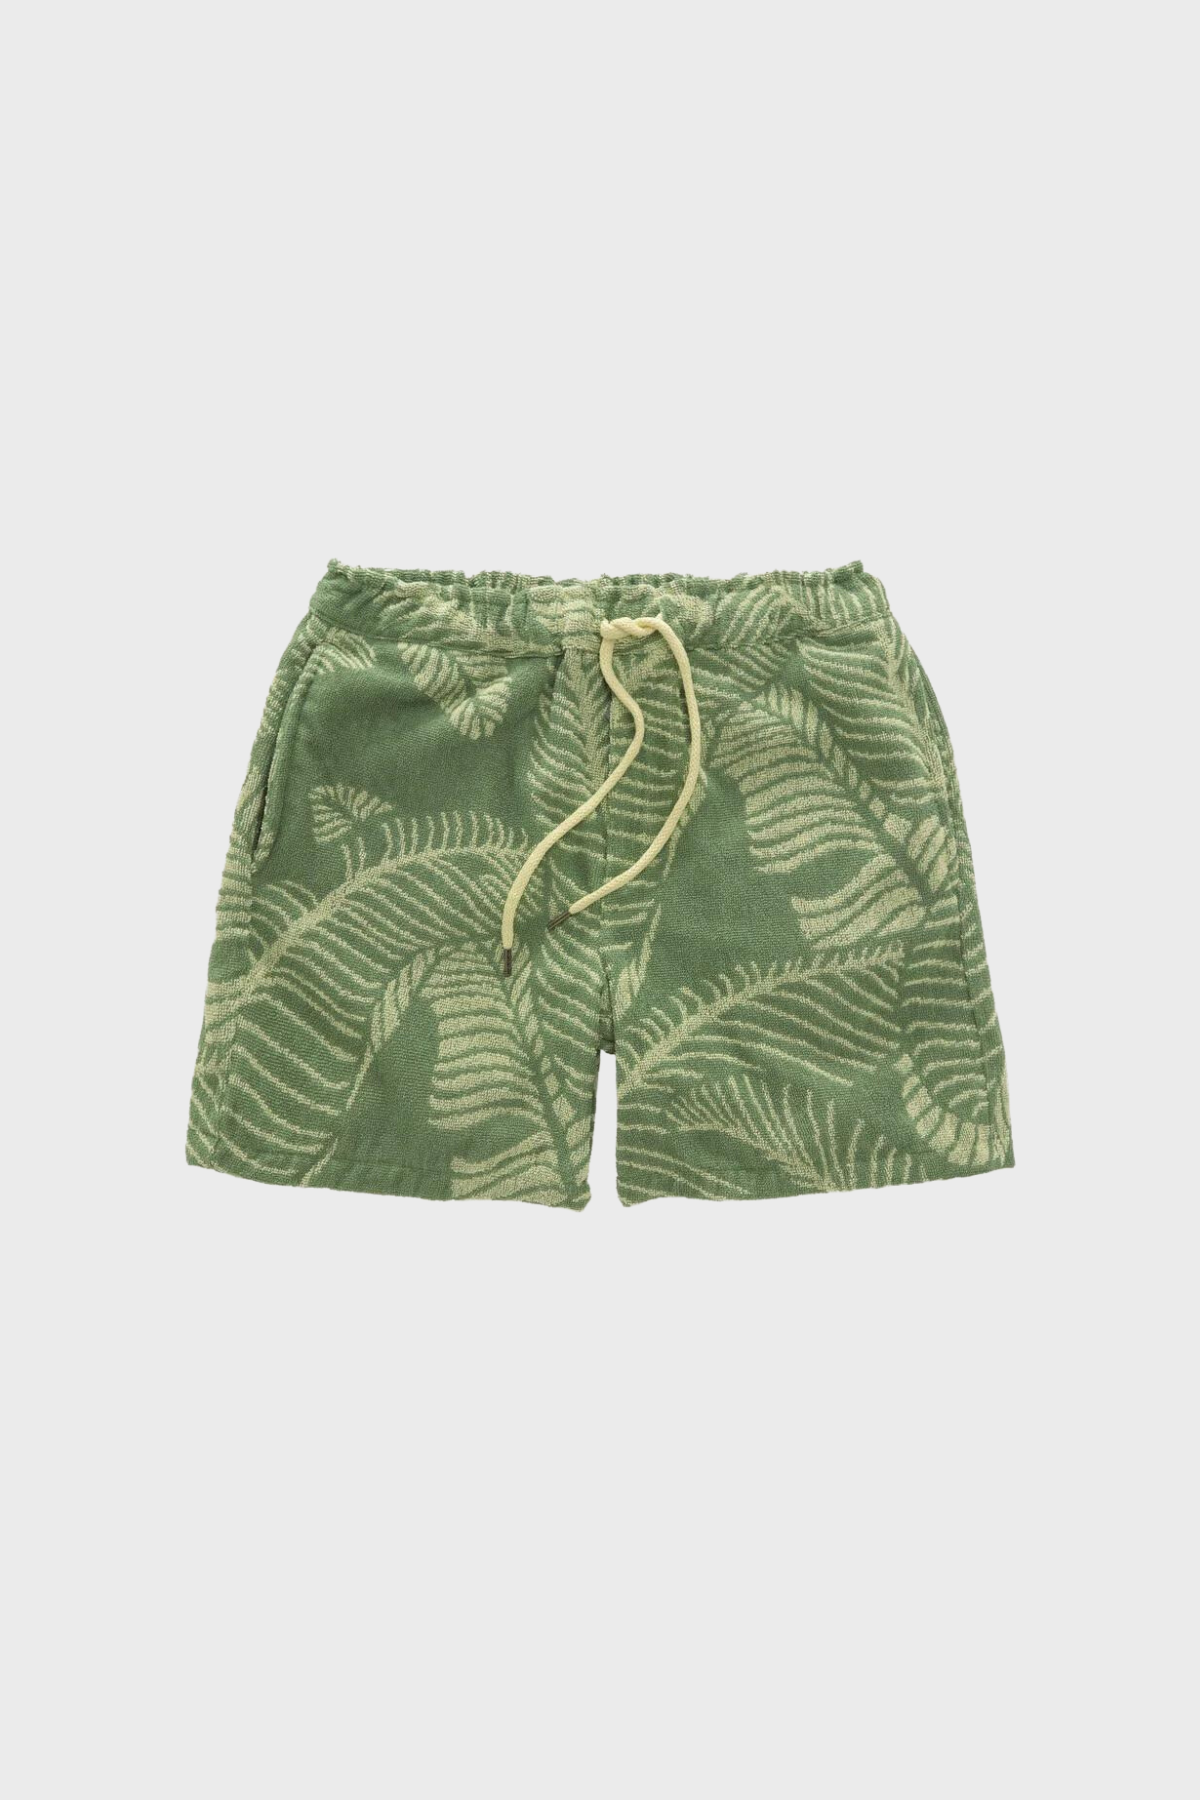 Terry Shorts in Banana Leaf